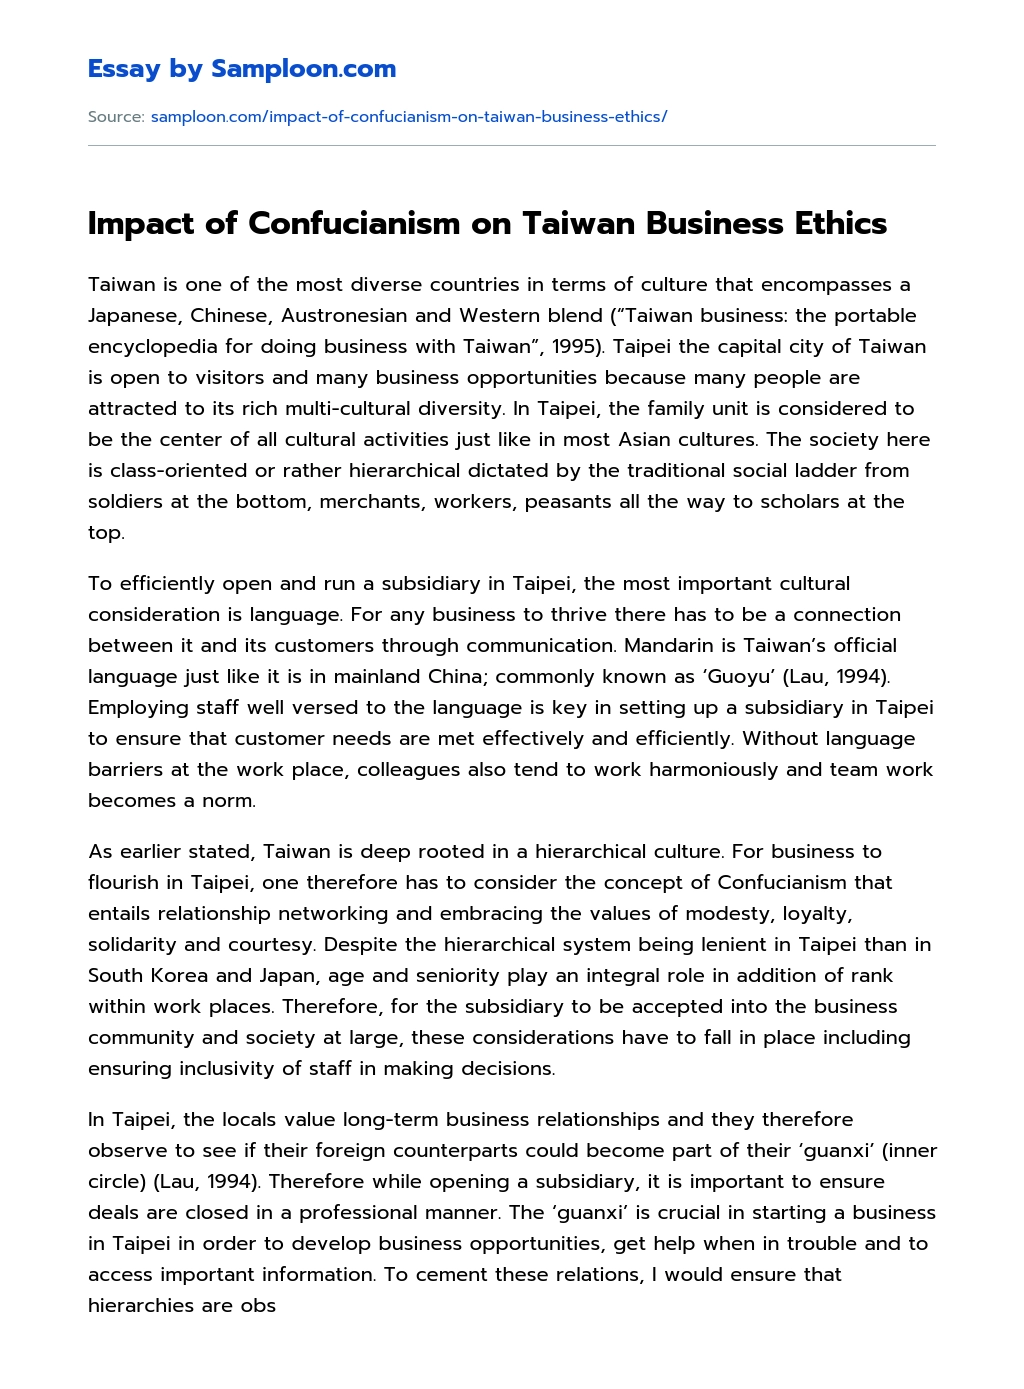 Impact of Confucianism on Taiwan Business Ethics essay